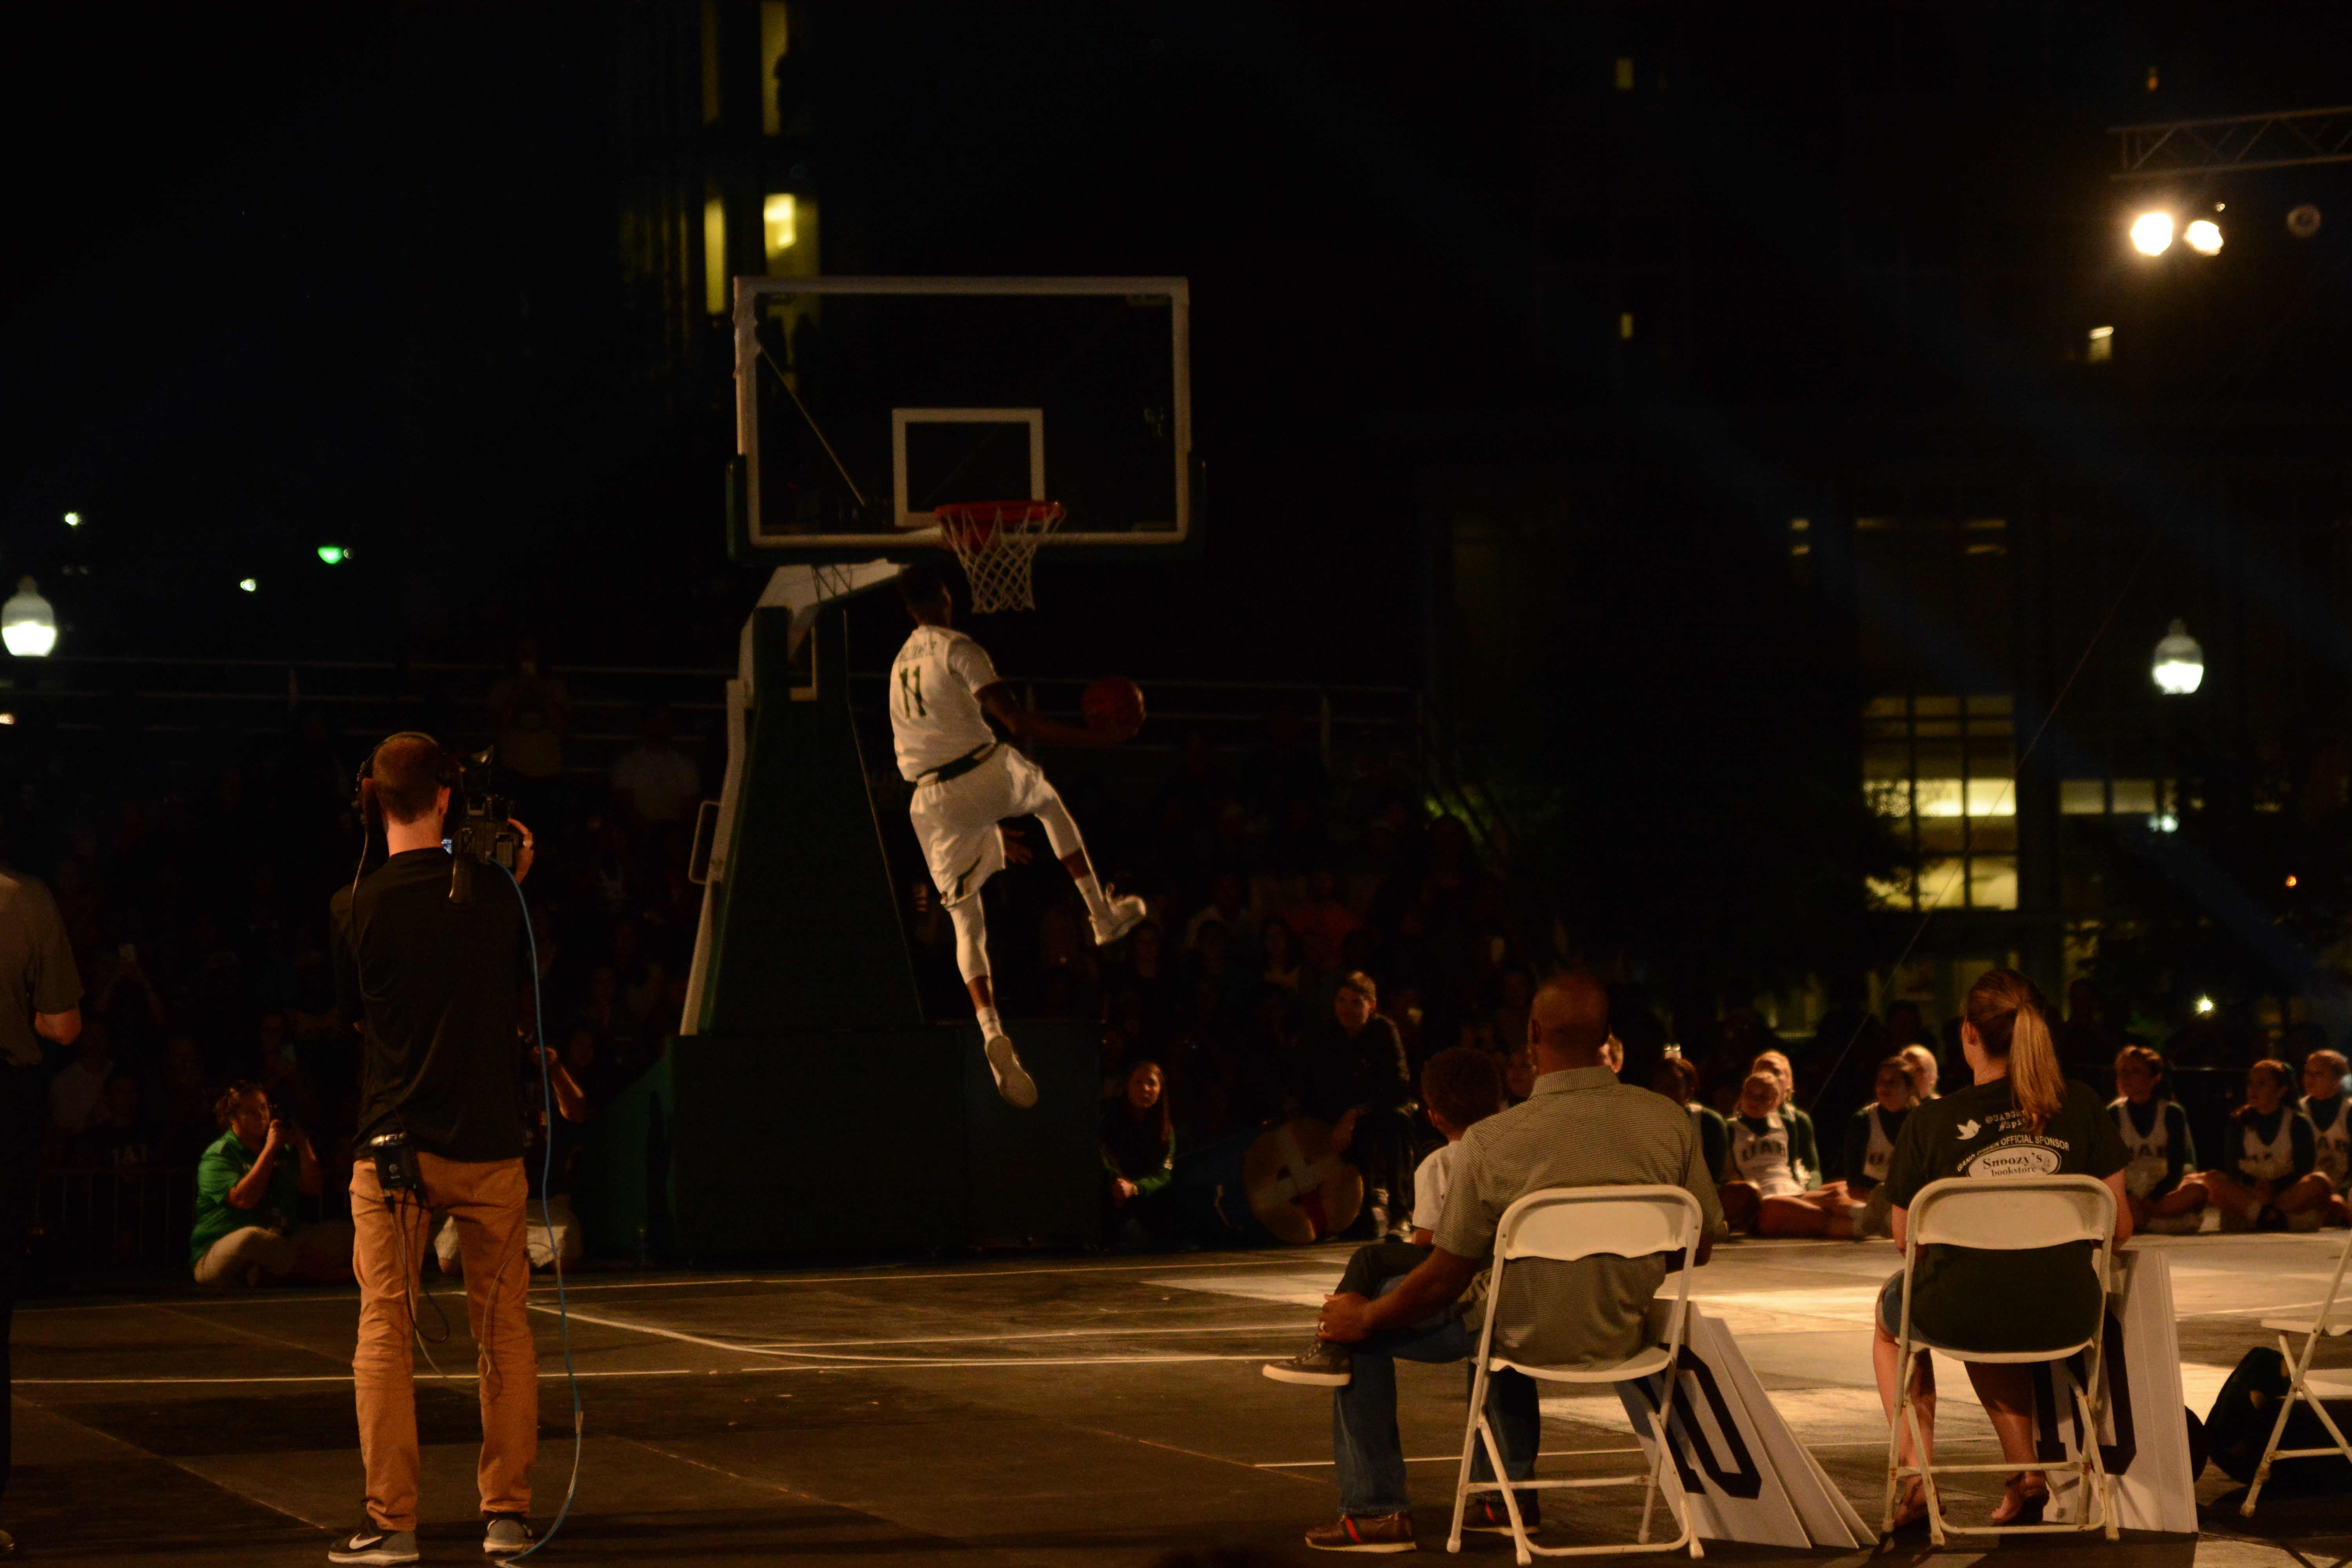 Senior guard Dirk Williams dunks the ball during the dunking contest at Hoops on the Green. Photo by Giani Martin